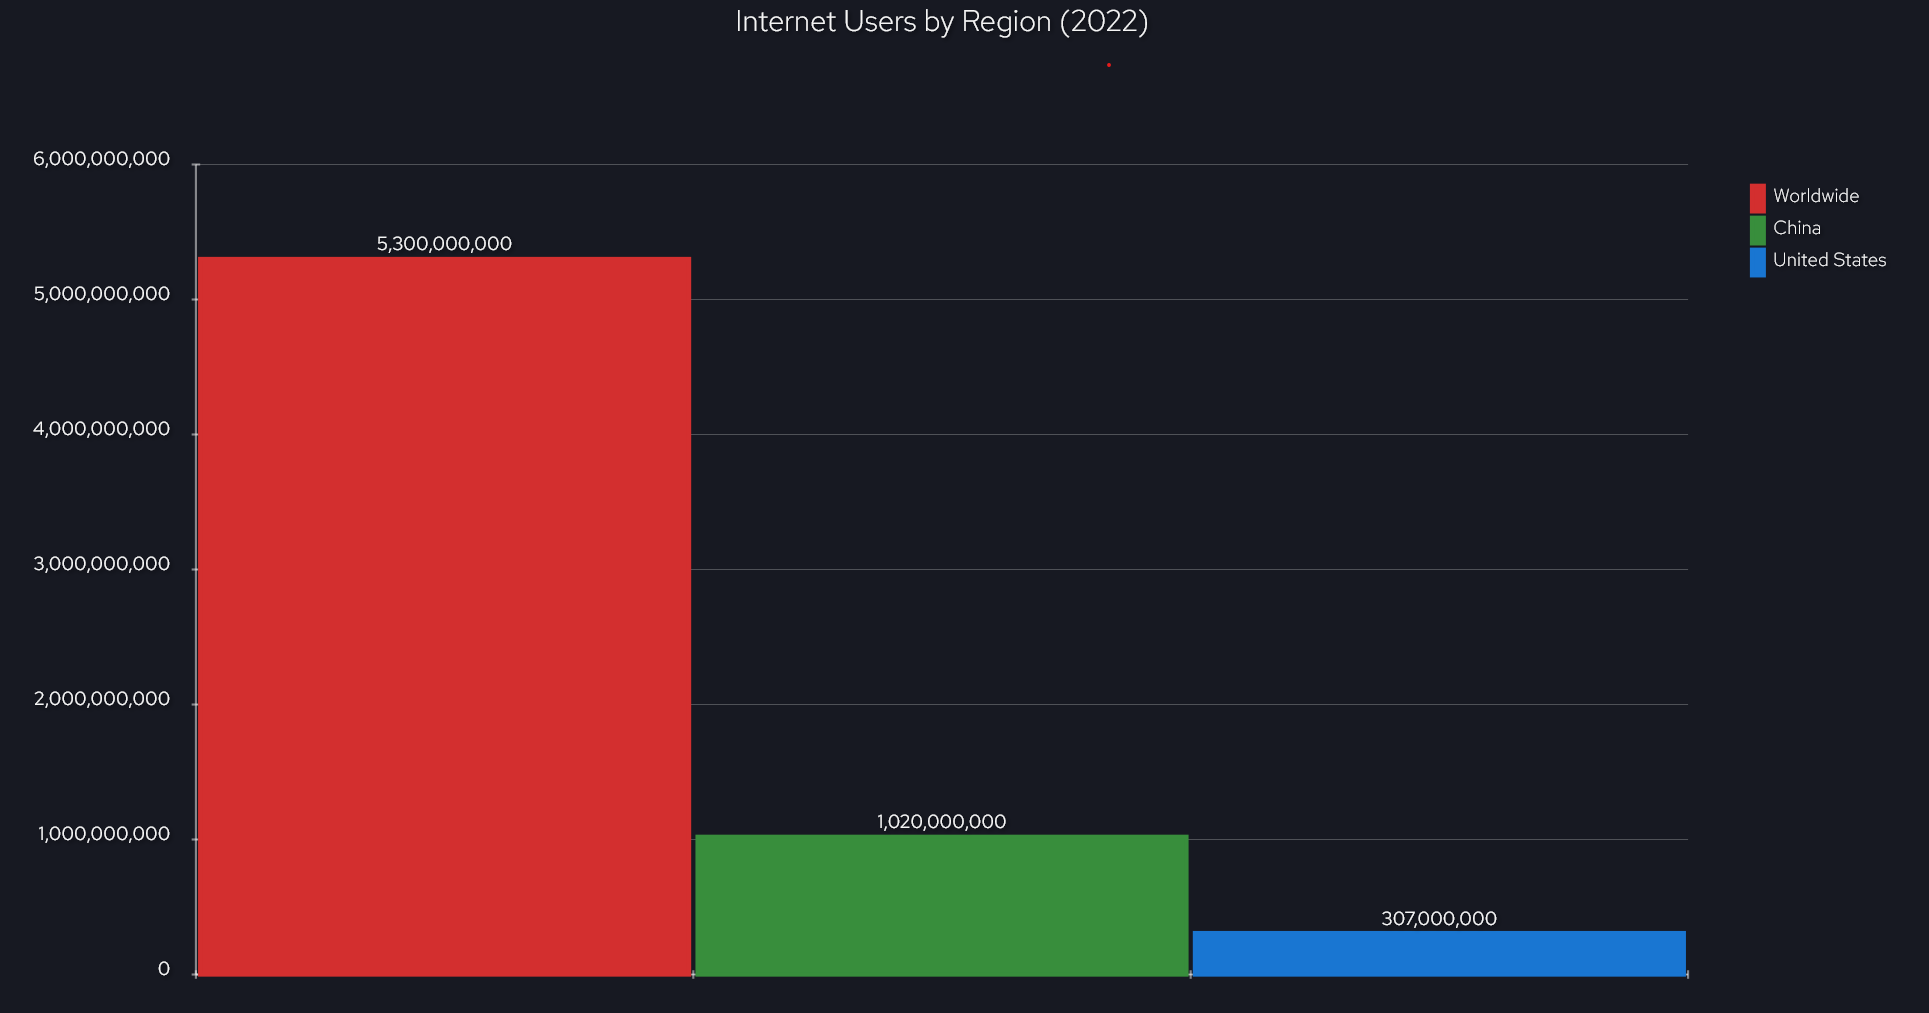 This chart shows the number of internet users in 2022 by region.